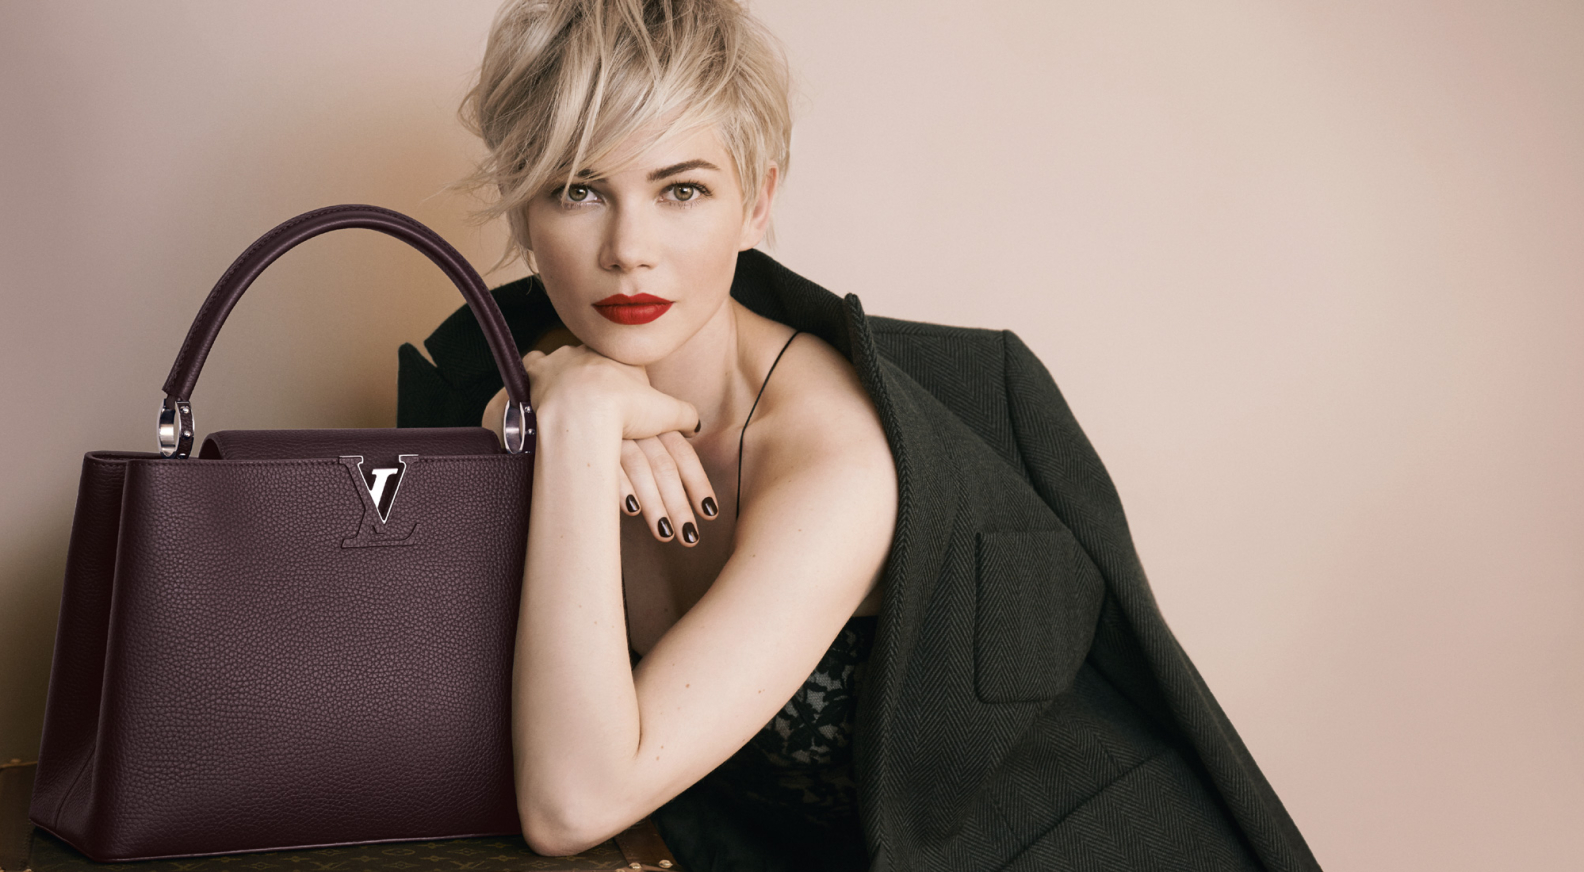 Michelle Williams's Louis Vuitton Campaign Hair and Bangs by Odile